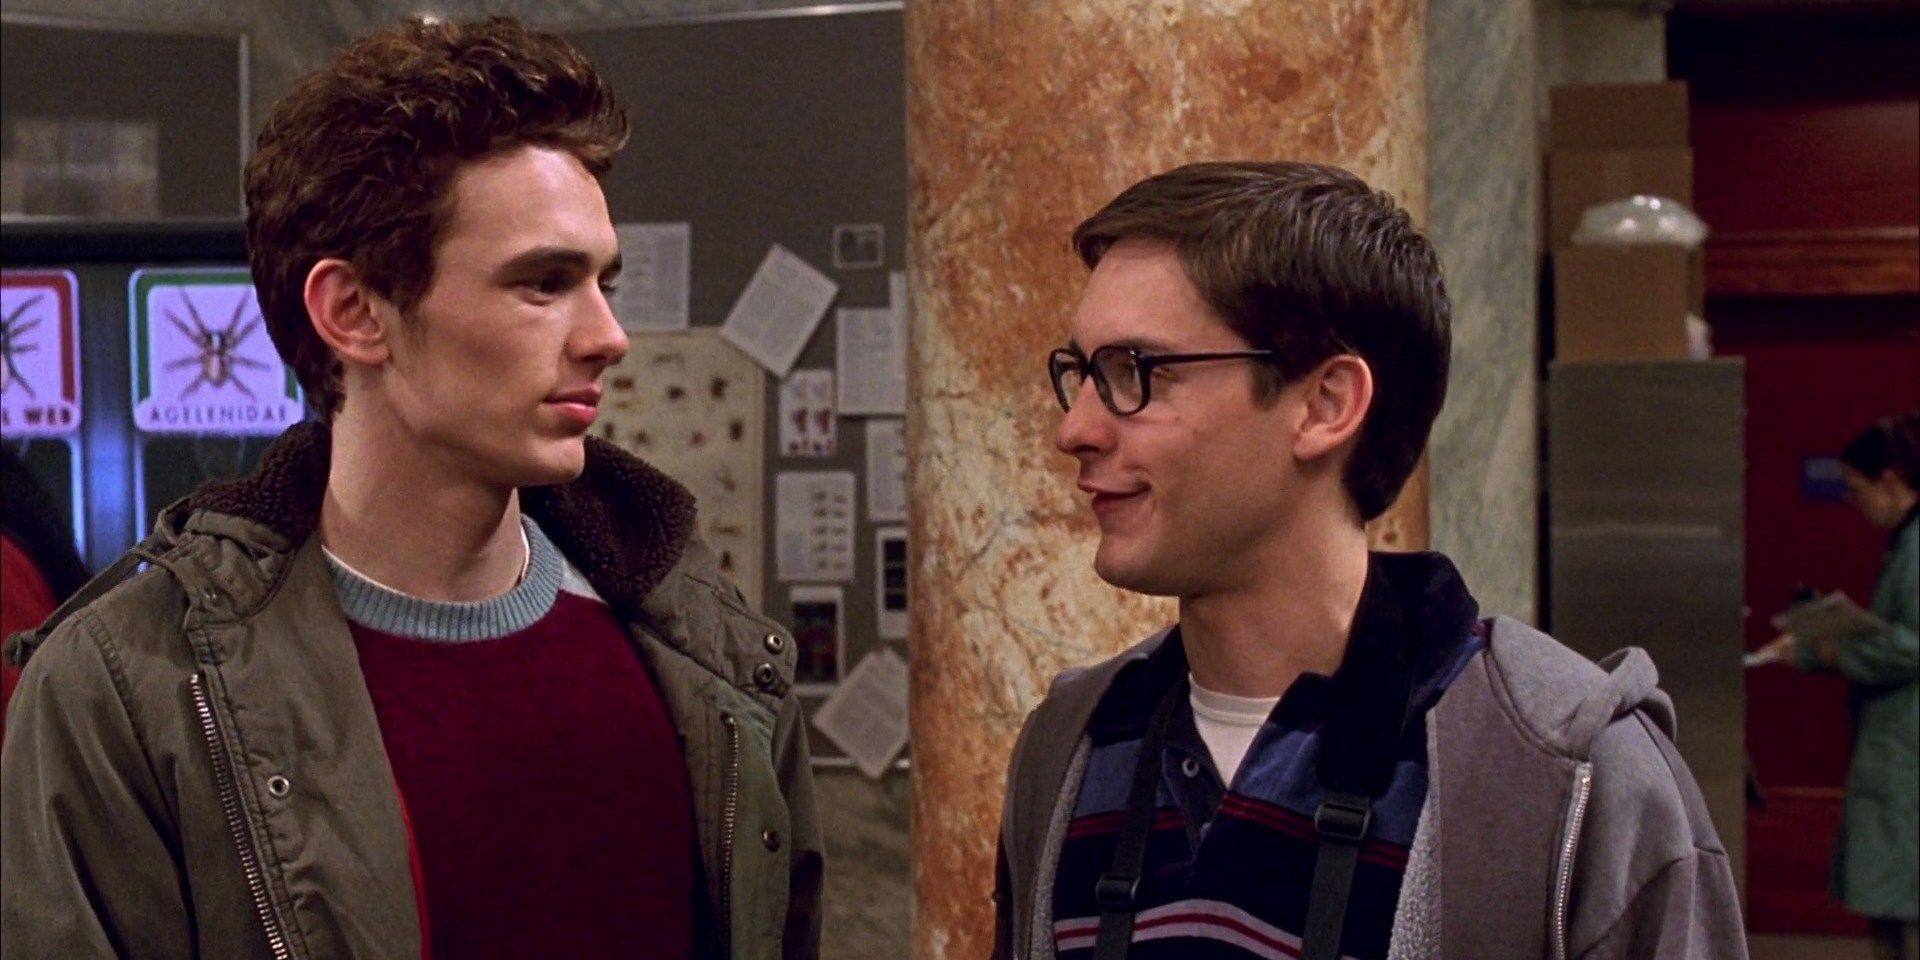 James Franco and Tobey Maguire in Spider-Man